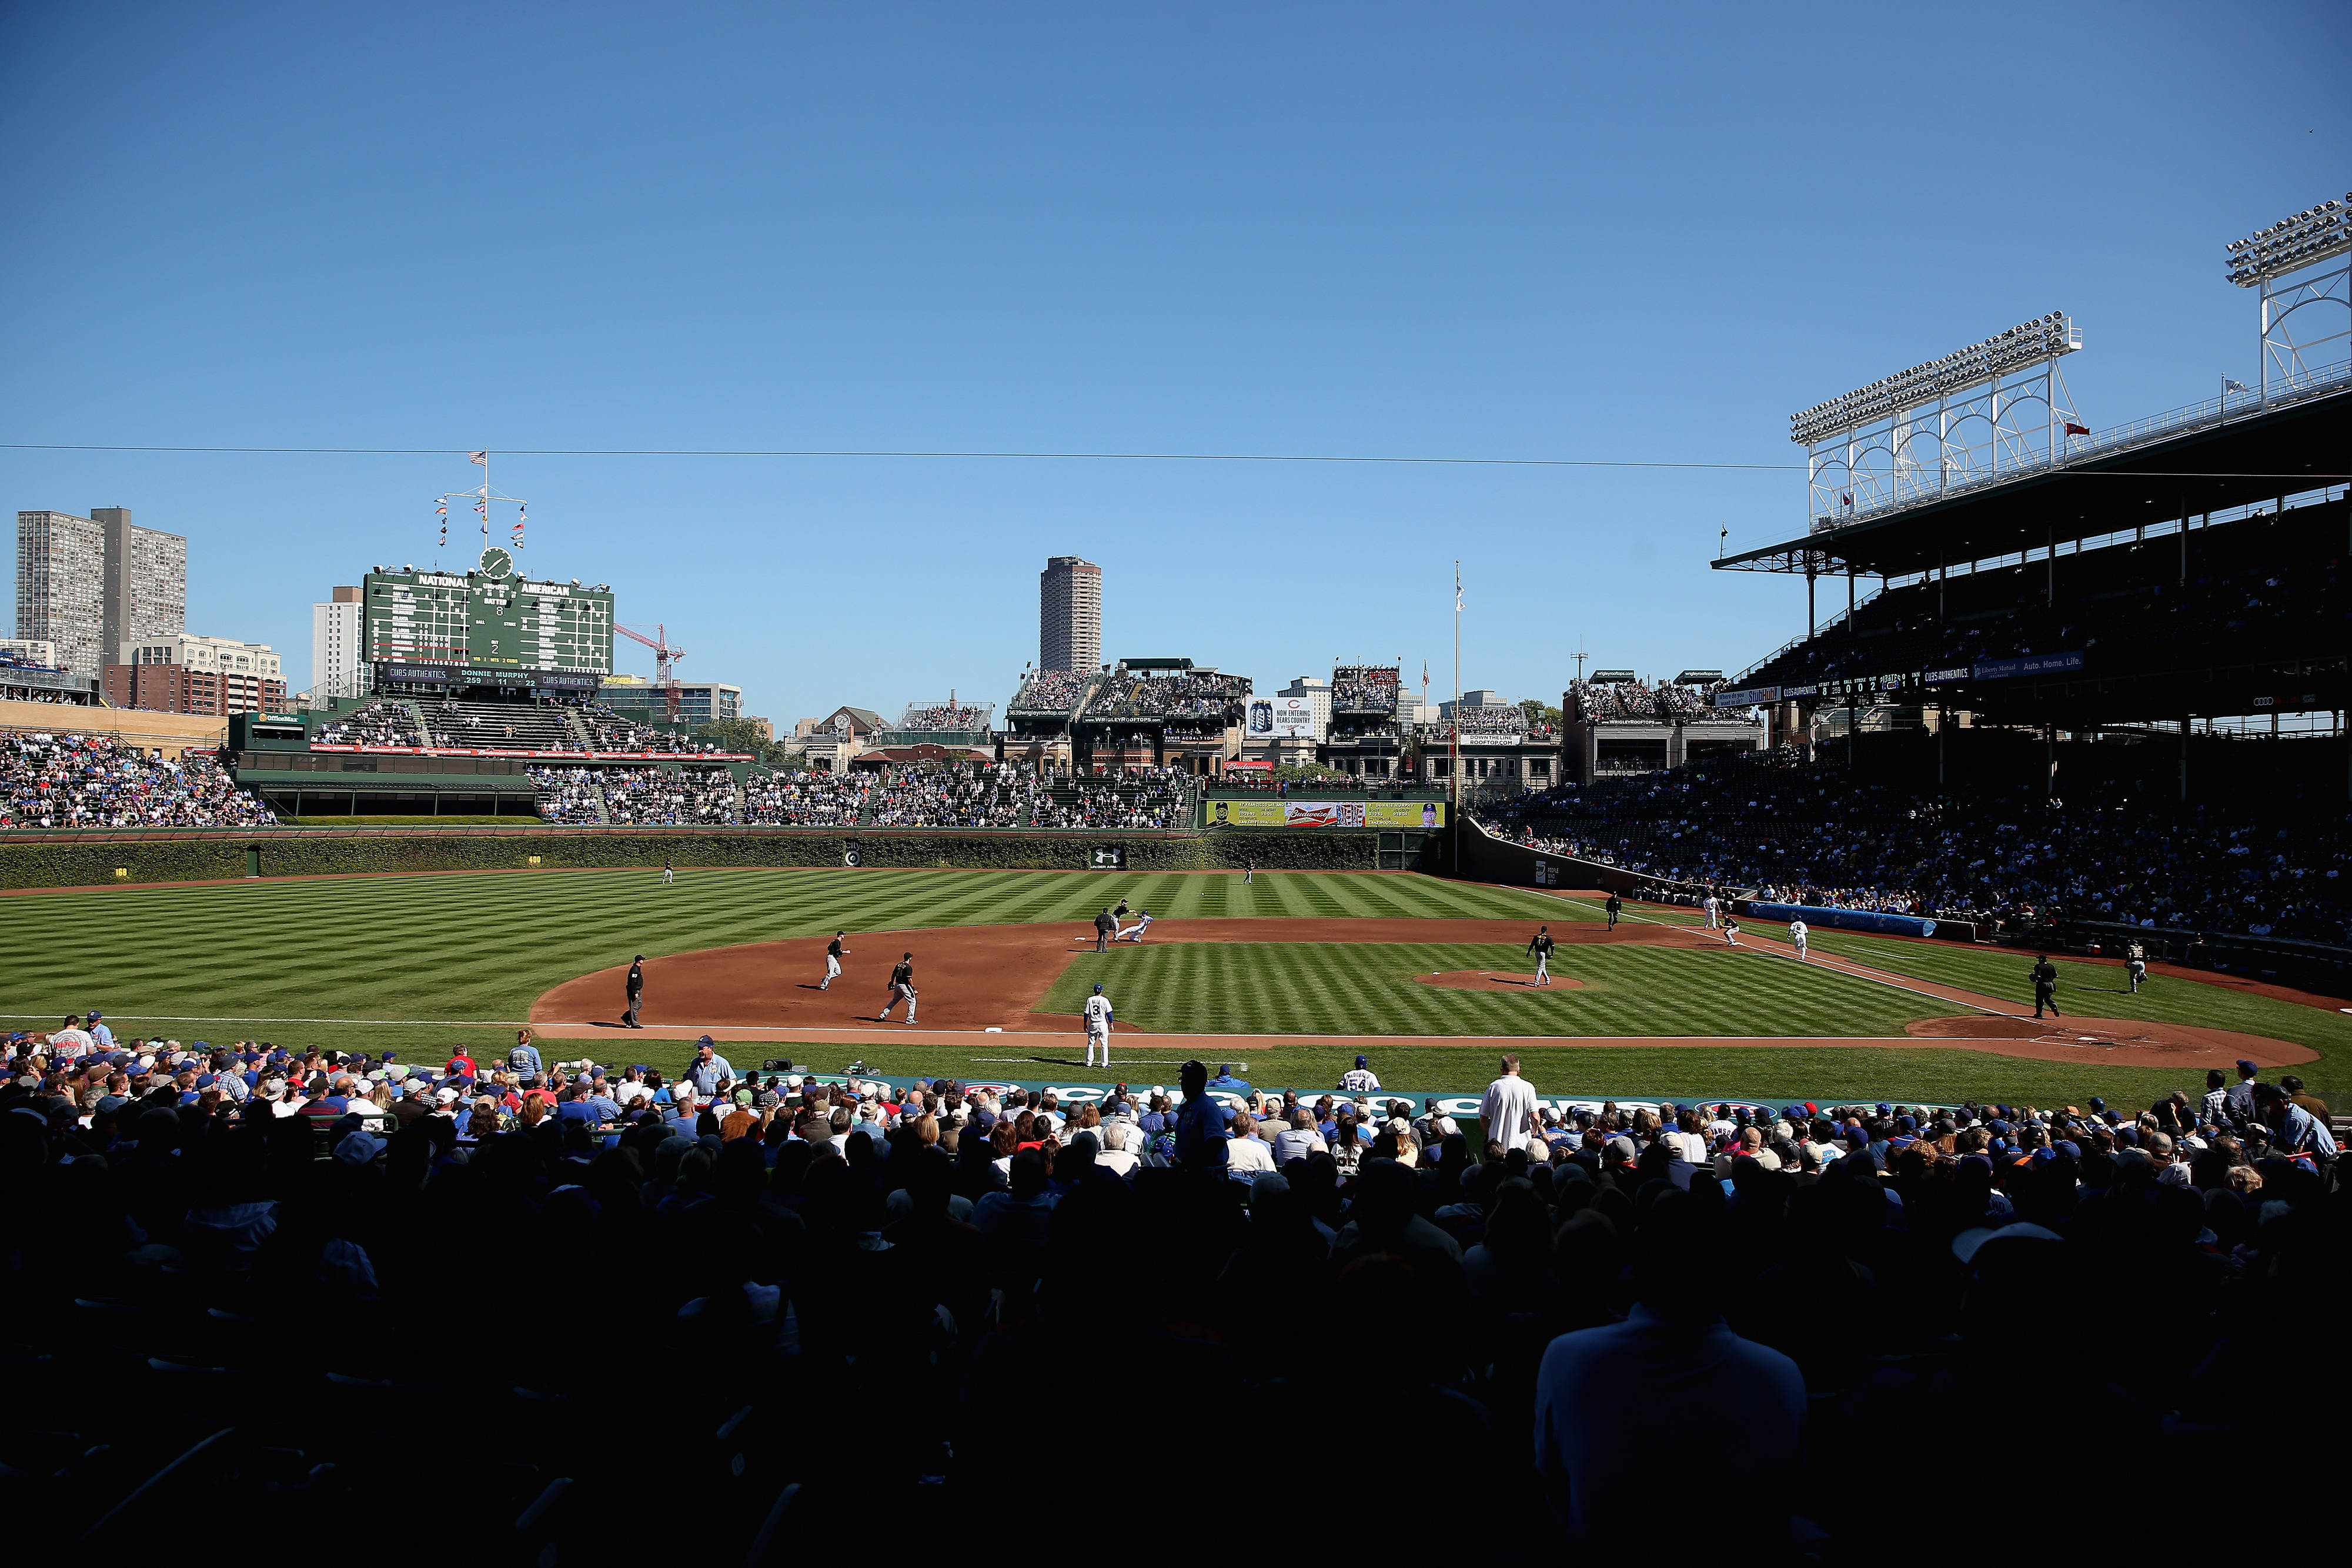 Wrigley Field on the last home game of 2013, preparing for next year